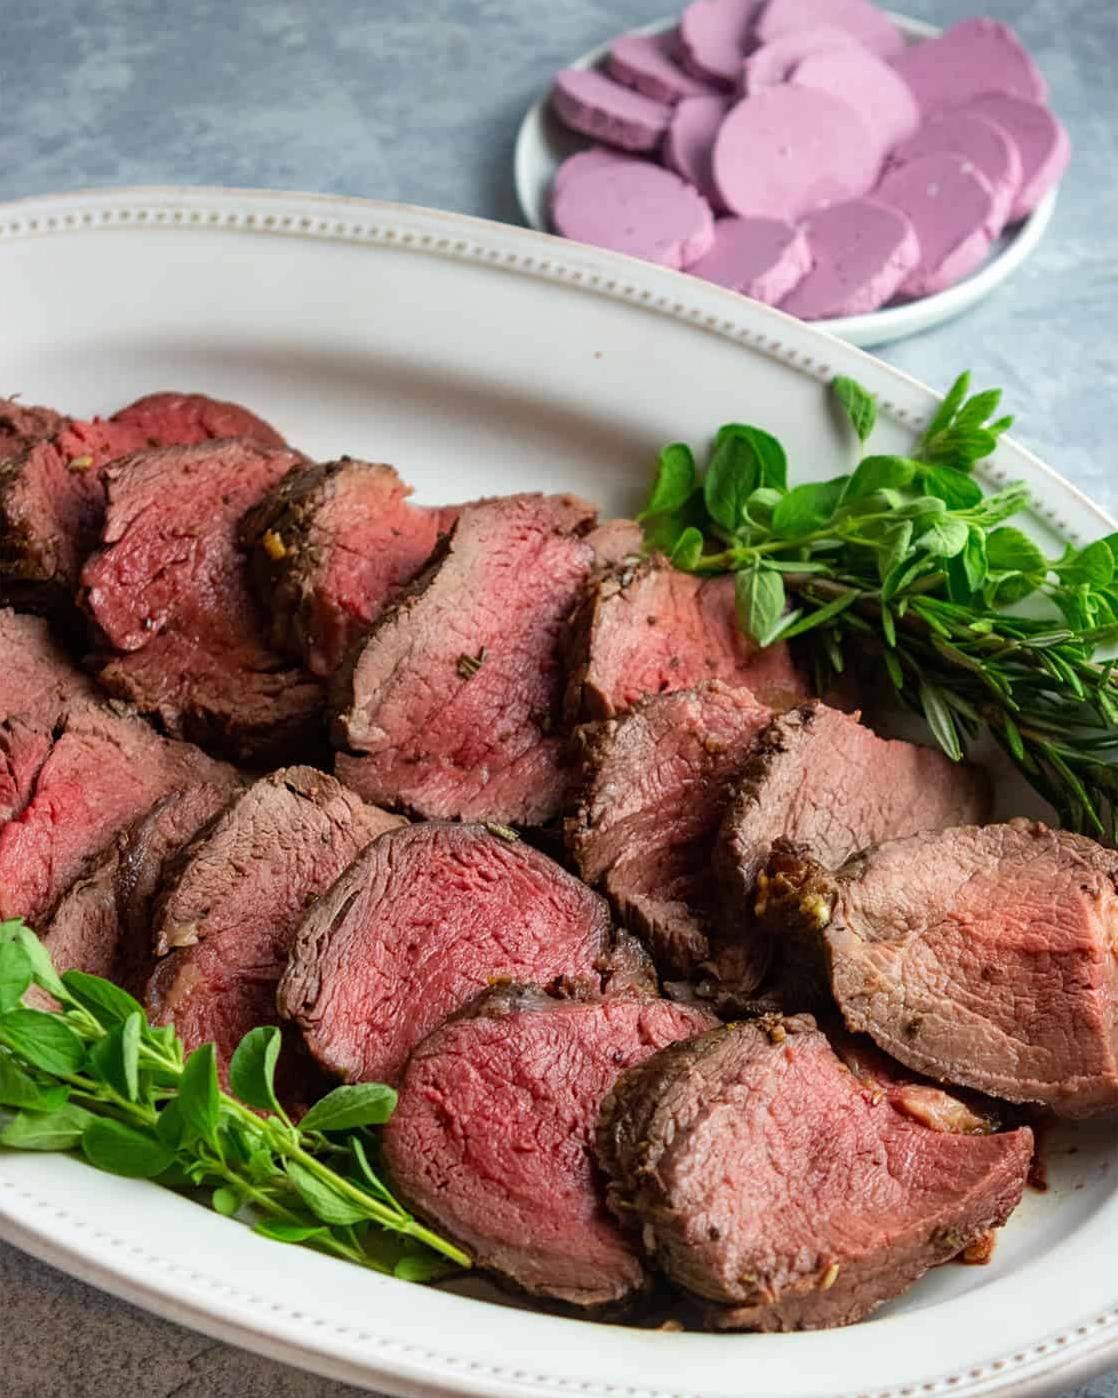  A classic pairing of beef and wine gets an unexpected twist with the addition of chocolate and rosemary.